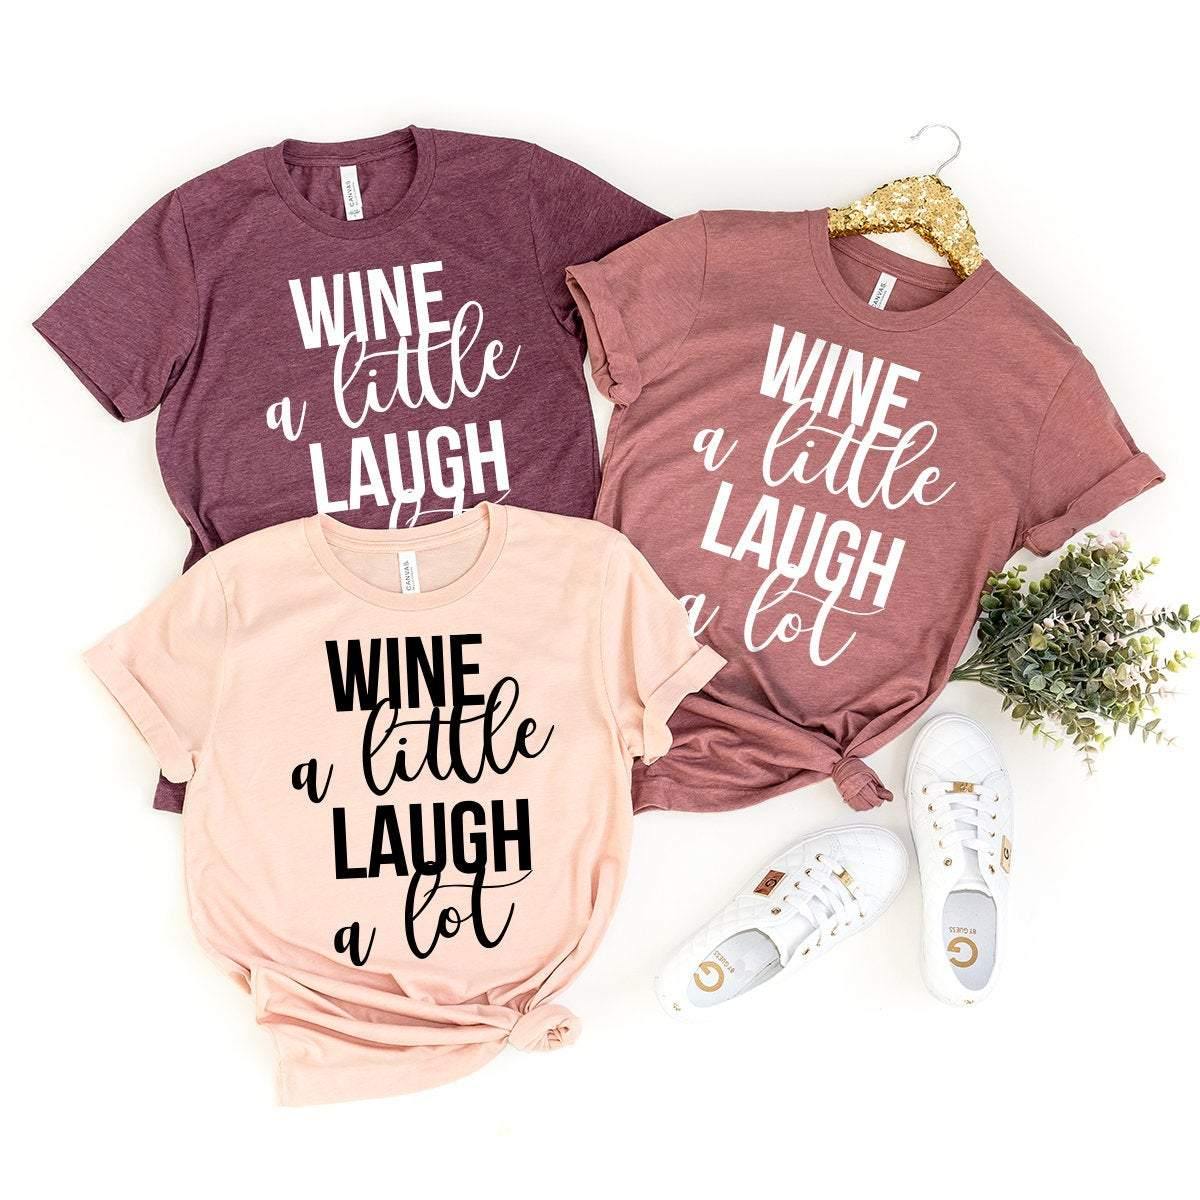 Wine A Little Laugh A Lot  Shirt,Wine Shirt,Wine Lover Shirt,Wine Tee,Funny Wine Shirt,Drinking Shirt,Gift For Wine Lover - Fastdeliverytees.com